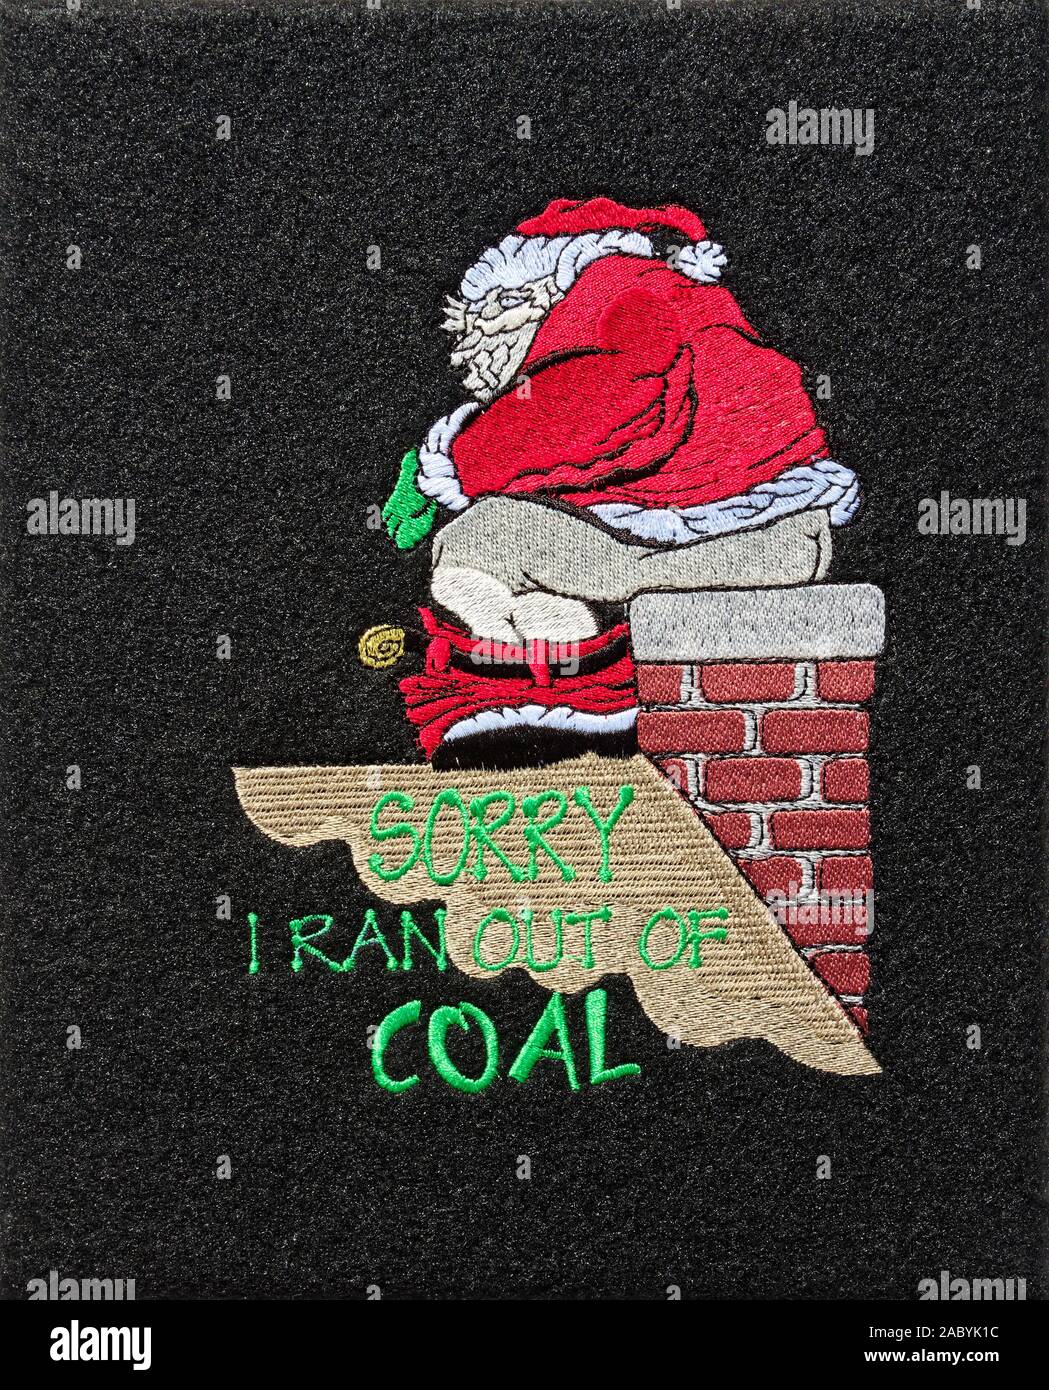 Christmas decoration, Santa, sitting on chimney, roof, pants down, using chimney as toilet, words 'Sorry I ran out of coal', humorous, black backgroun Stock Photo